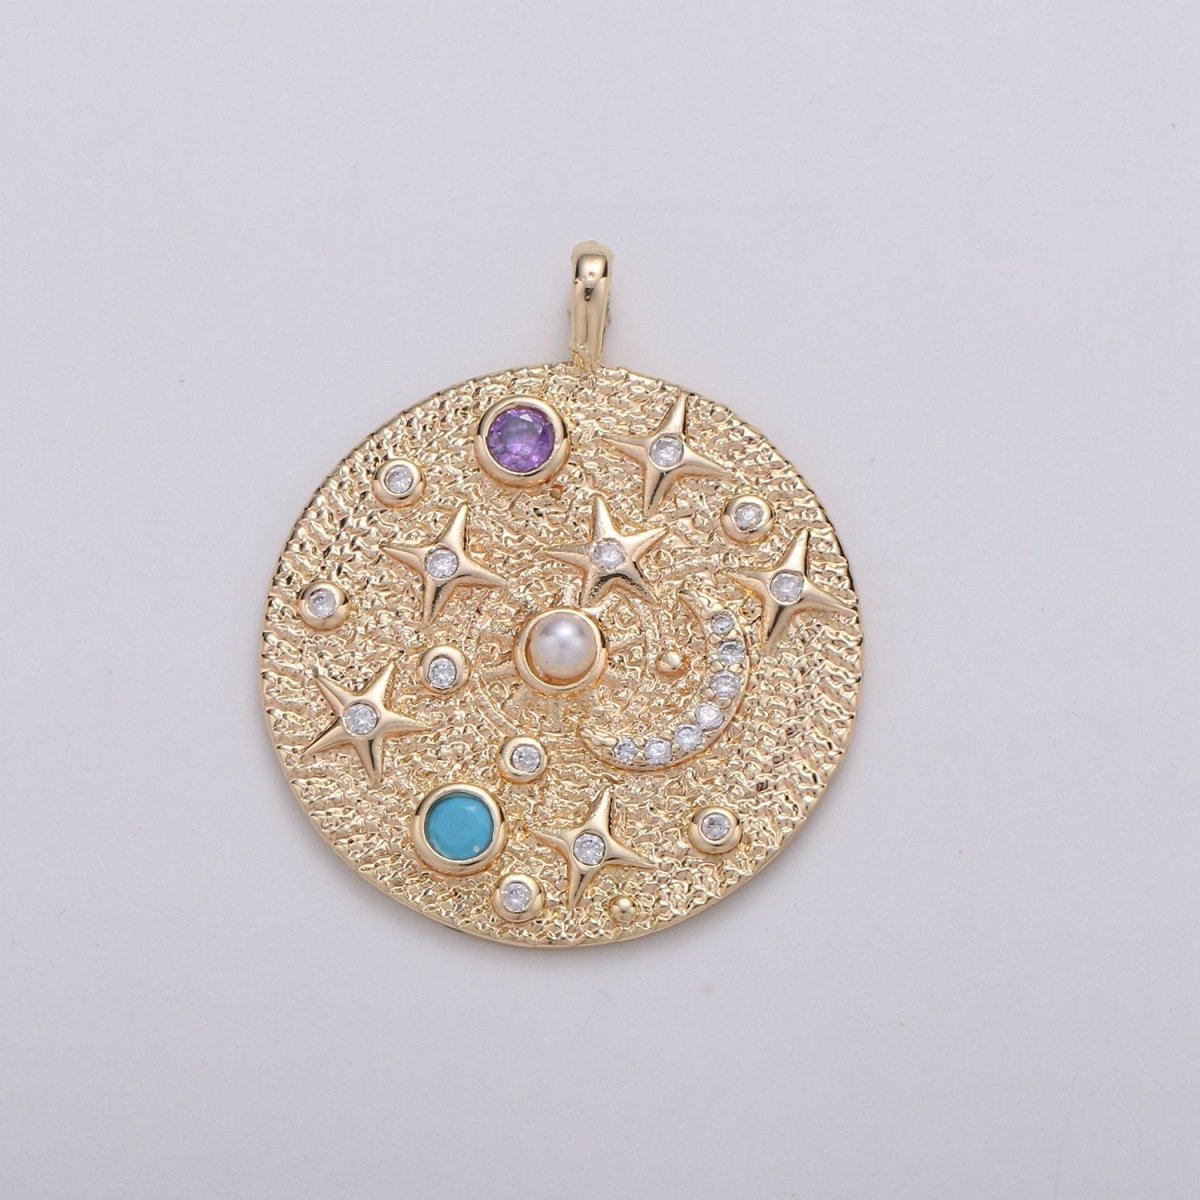 Pearl and Multi color CZ Planet in the Universe Round Pendant 14K gold Filled Charm, Star, Cresent Moon, Galaxy, DIY Jewelry Necklace making D-737 - DLUXCA